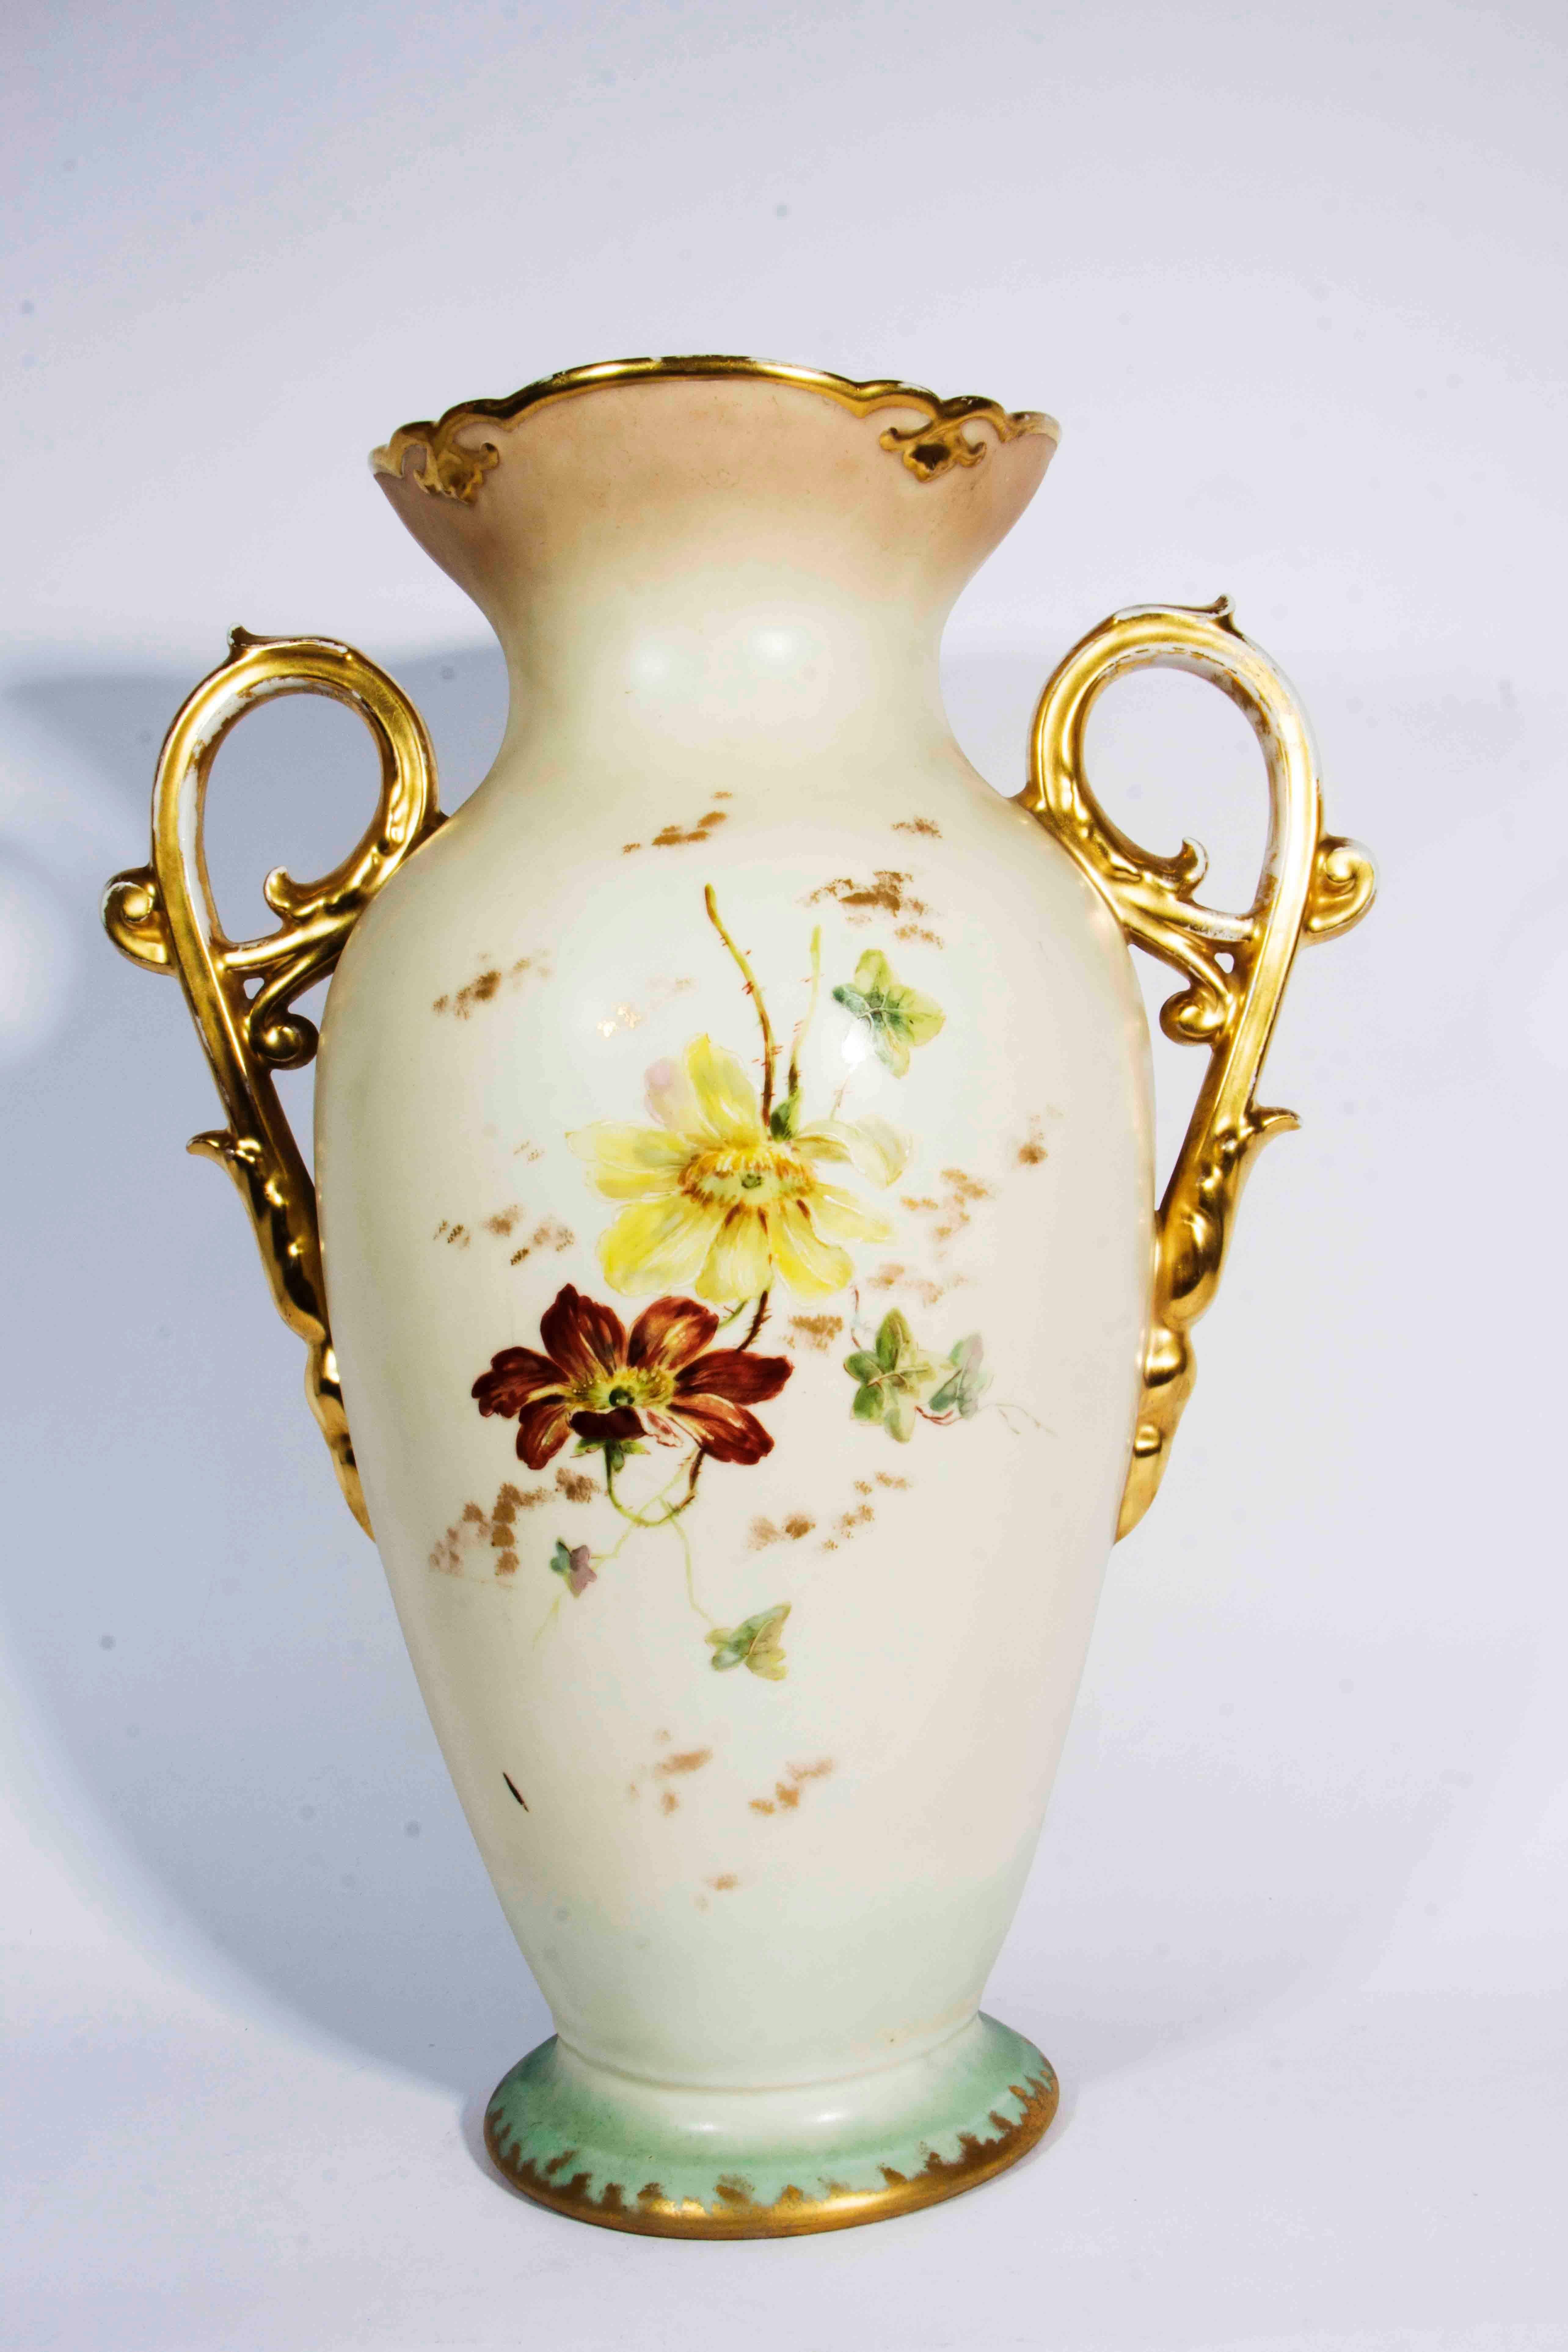 Antique French porcelain decorative vase / piece with gold handle. The vase measure 16 inches high x 11 inches diameter.